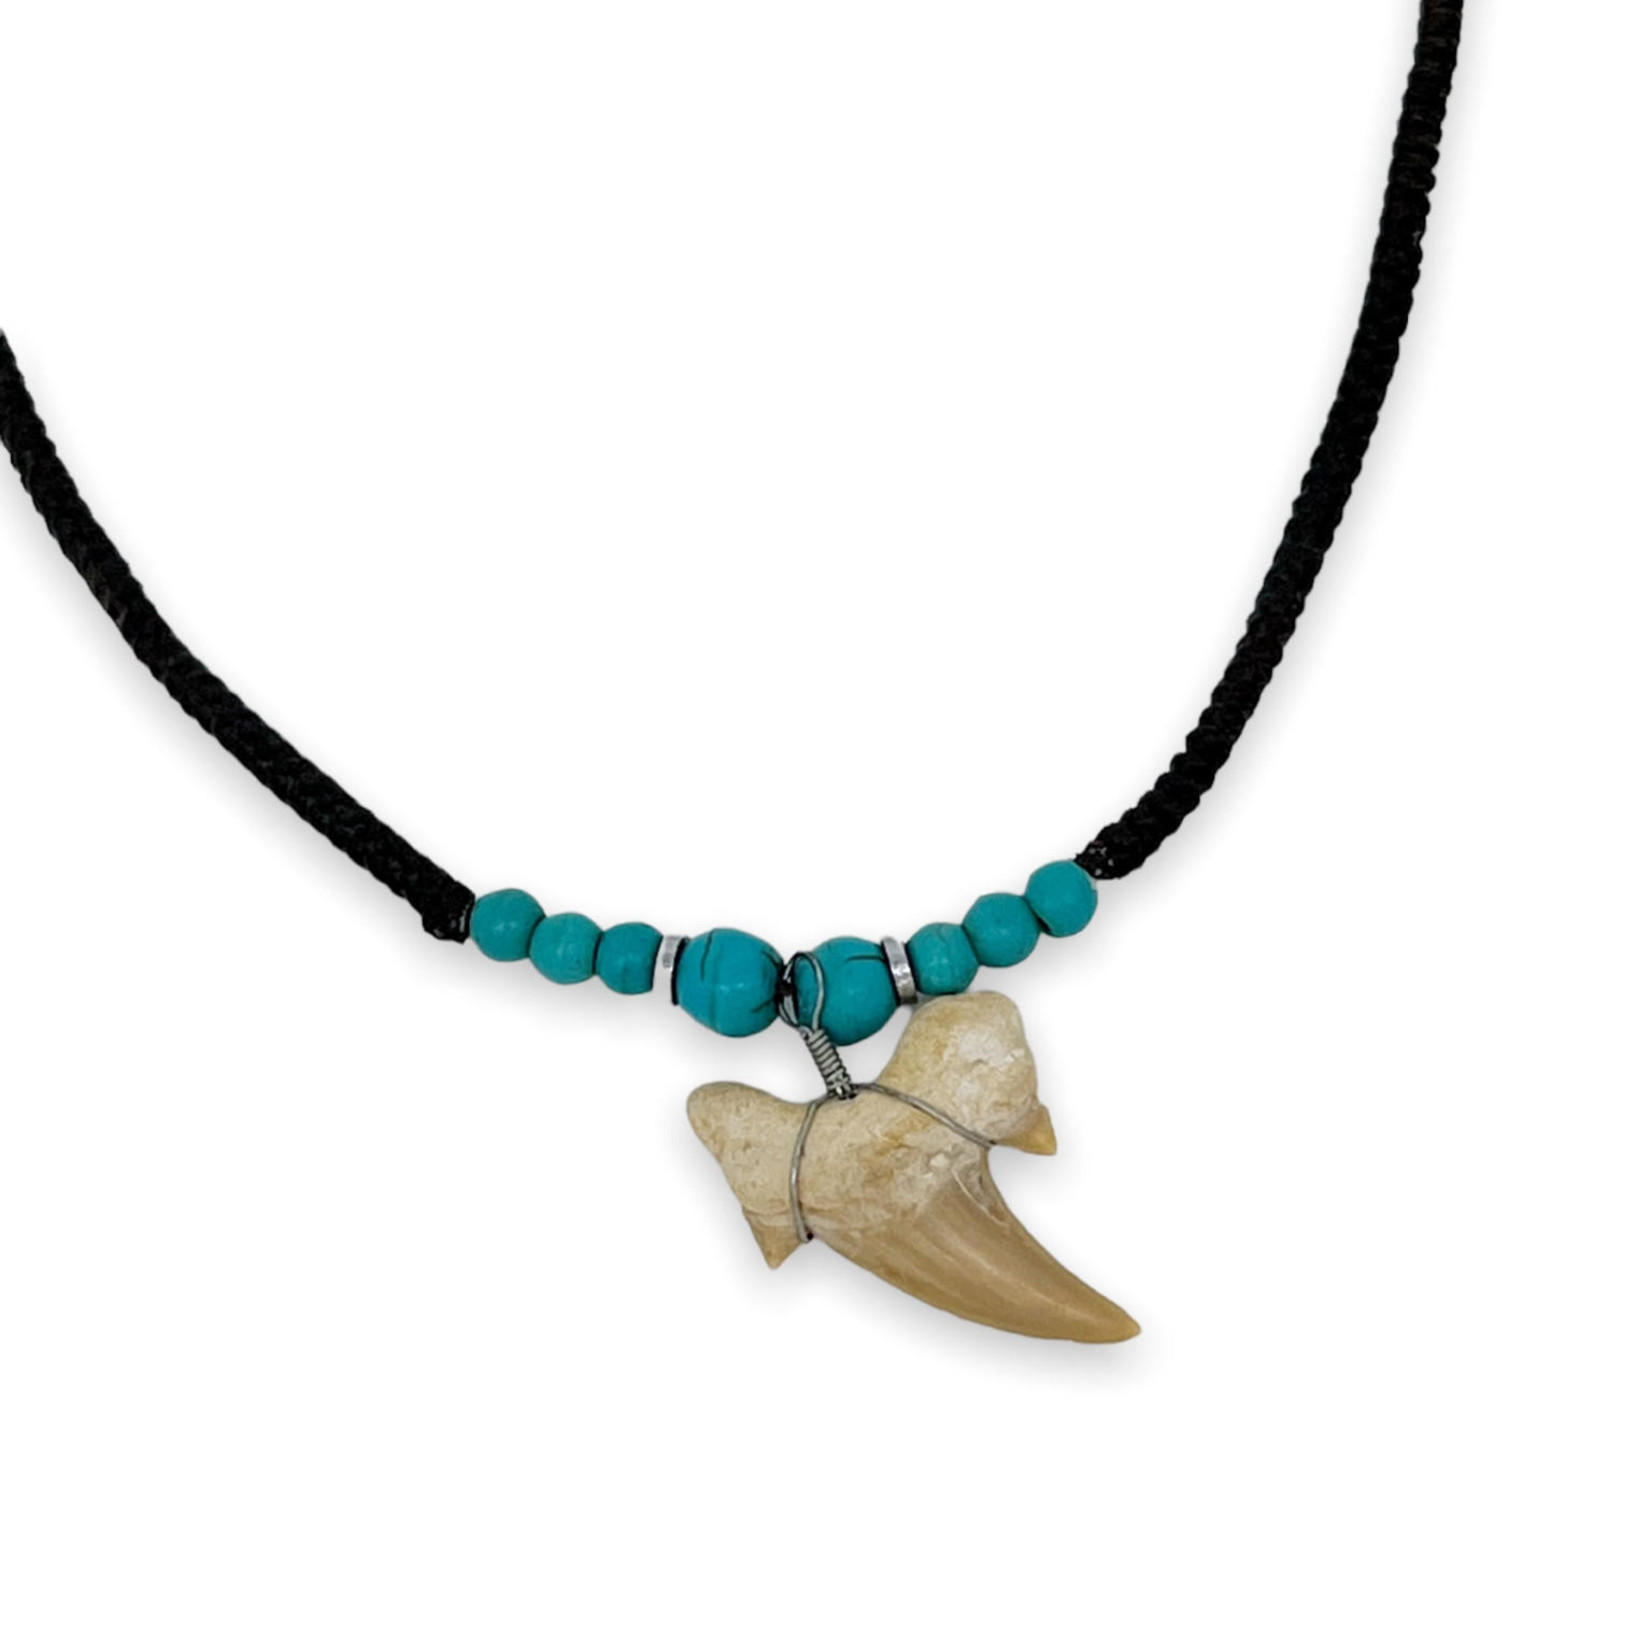 Shark Tooth Necklace on Wax Cord with Turquoise